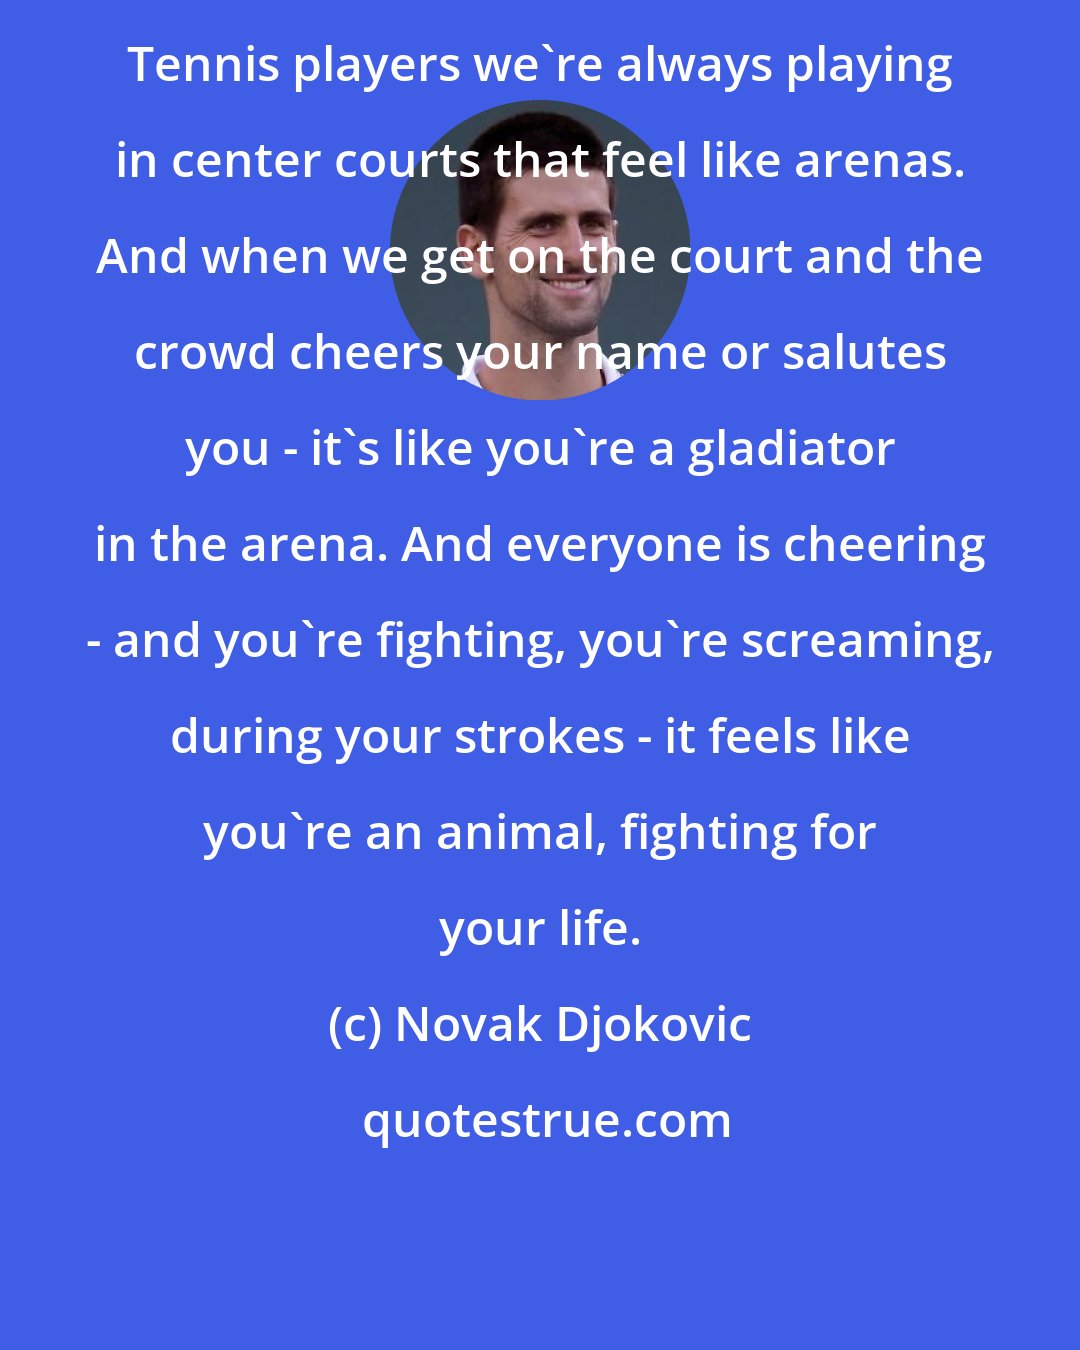 Novak Djokovic: Tennis players we're always playing in center courts that feel like arenas. And when we get on the court and the crowd cheers your name or salutes you - it's like you're a gladiator in the arena. And everyone is cheering - and you're fighting, you're screaming, during your strokes - it feels like you're an animal, fighting for your life.